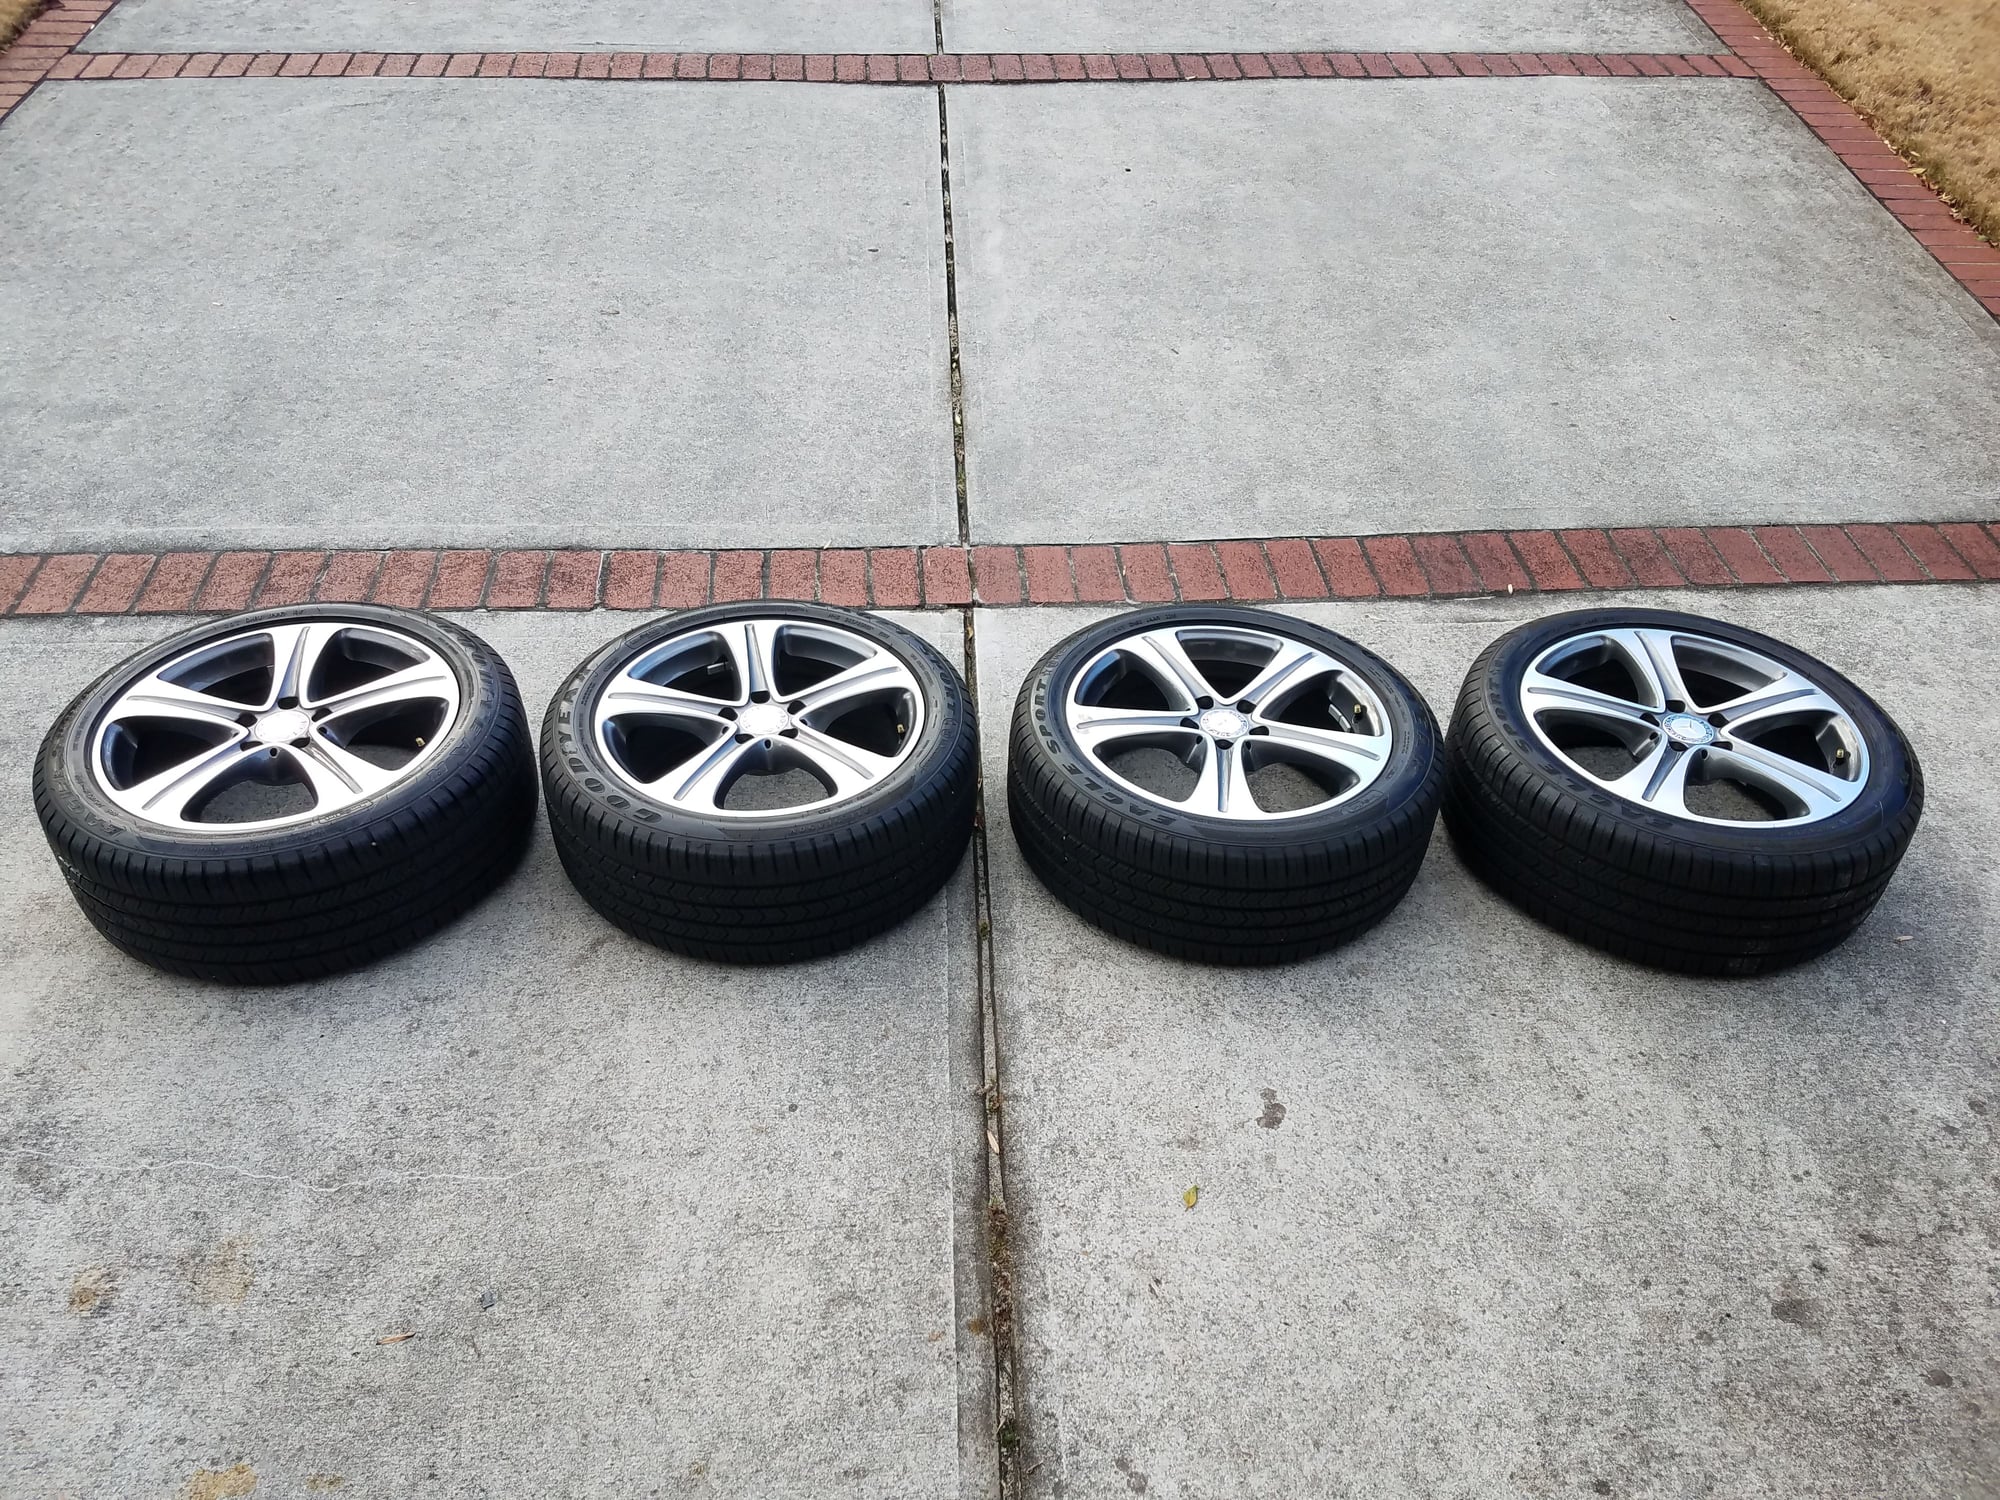 Wheels and Tires/Axles - Mercedes 8Jx18" Inch Original W213 E300 E-Class OEM Wheels/Tires A2134011400 Goodyear - Used - 2017 to 2018 Mercedes-Benz E300 - Decatur, GA 30033, United States